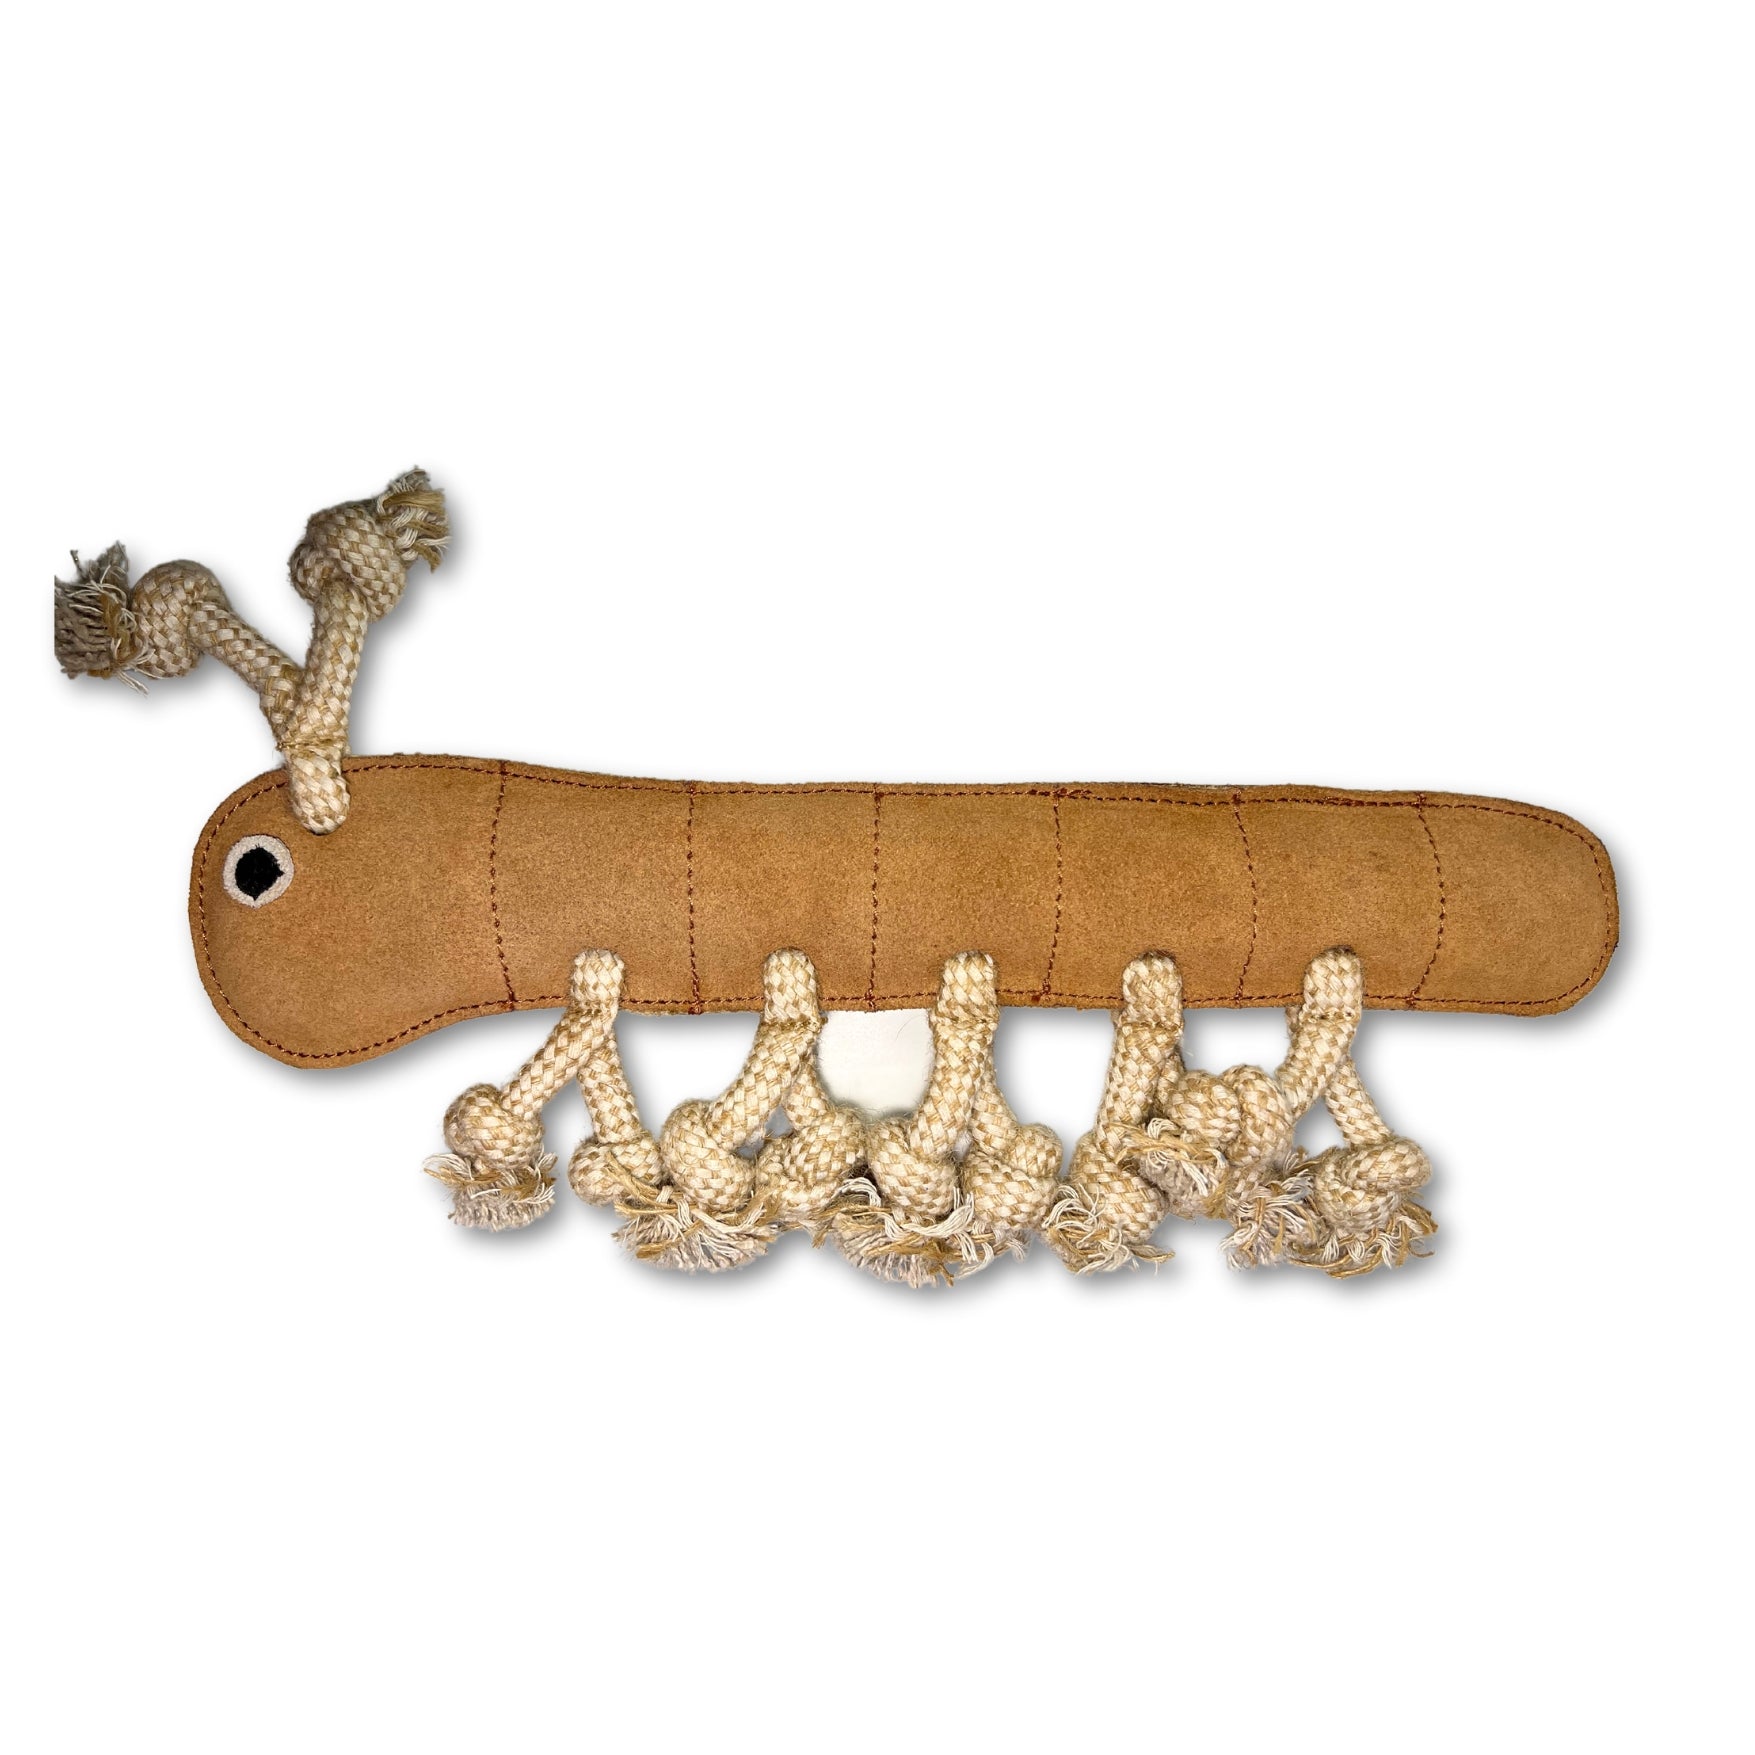 A whimsical brown and beige sustainable Gerti the Grub plush toy from Georgie Paws, featuring a friendly face with one visible eye, and multiple textured segments ending in rope-knotted limbs, designed for playful interaction and sensory exploration.